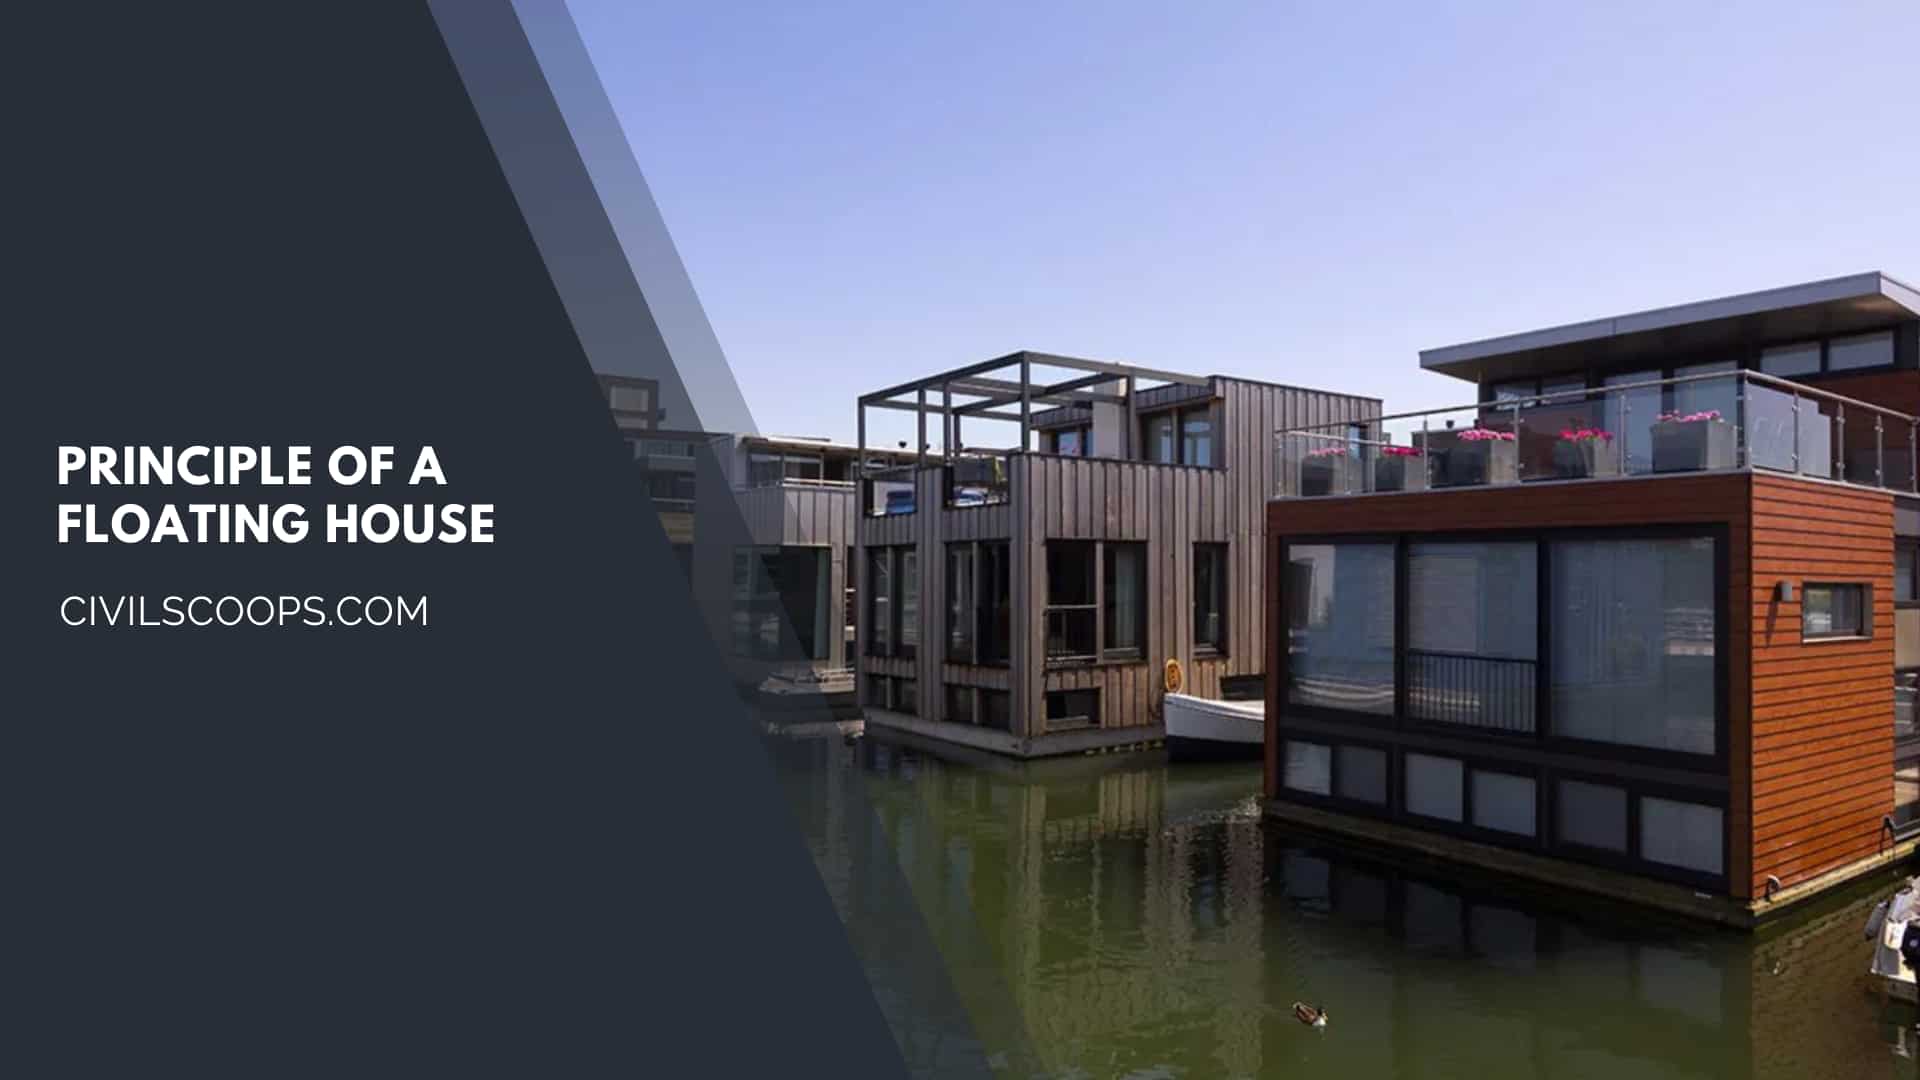 Principle of a Floating House